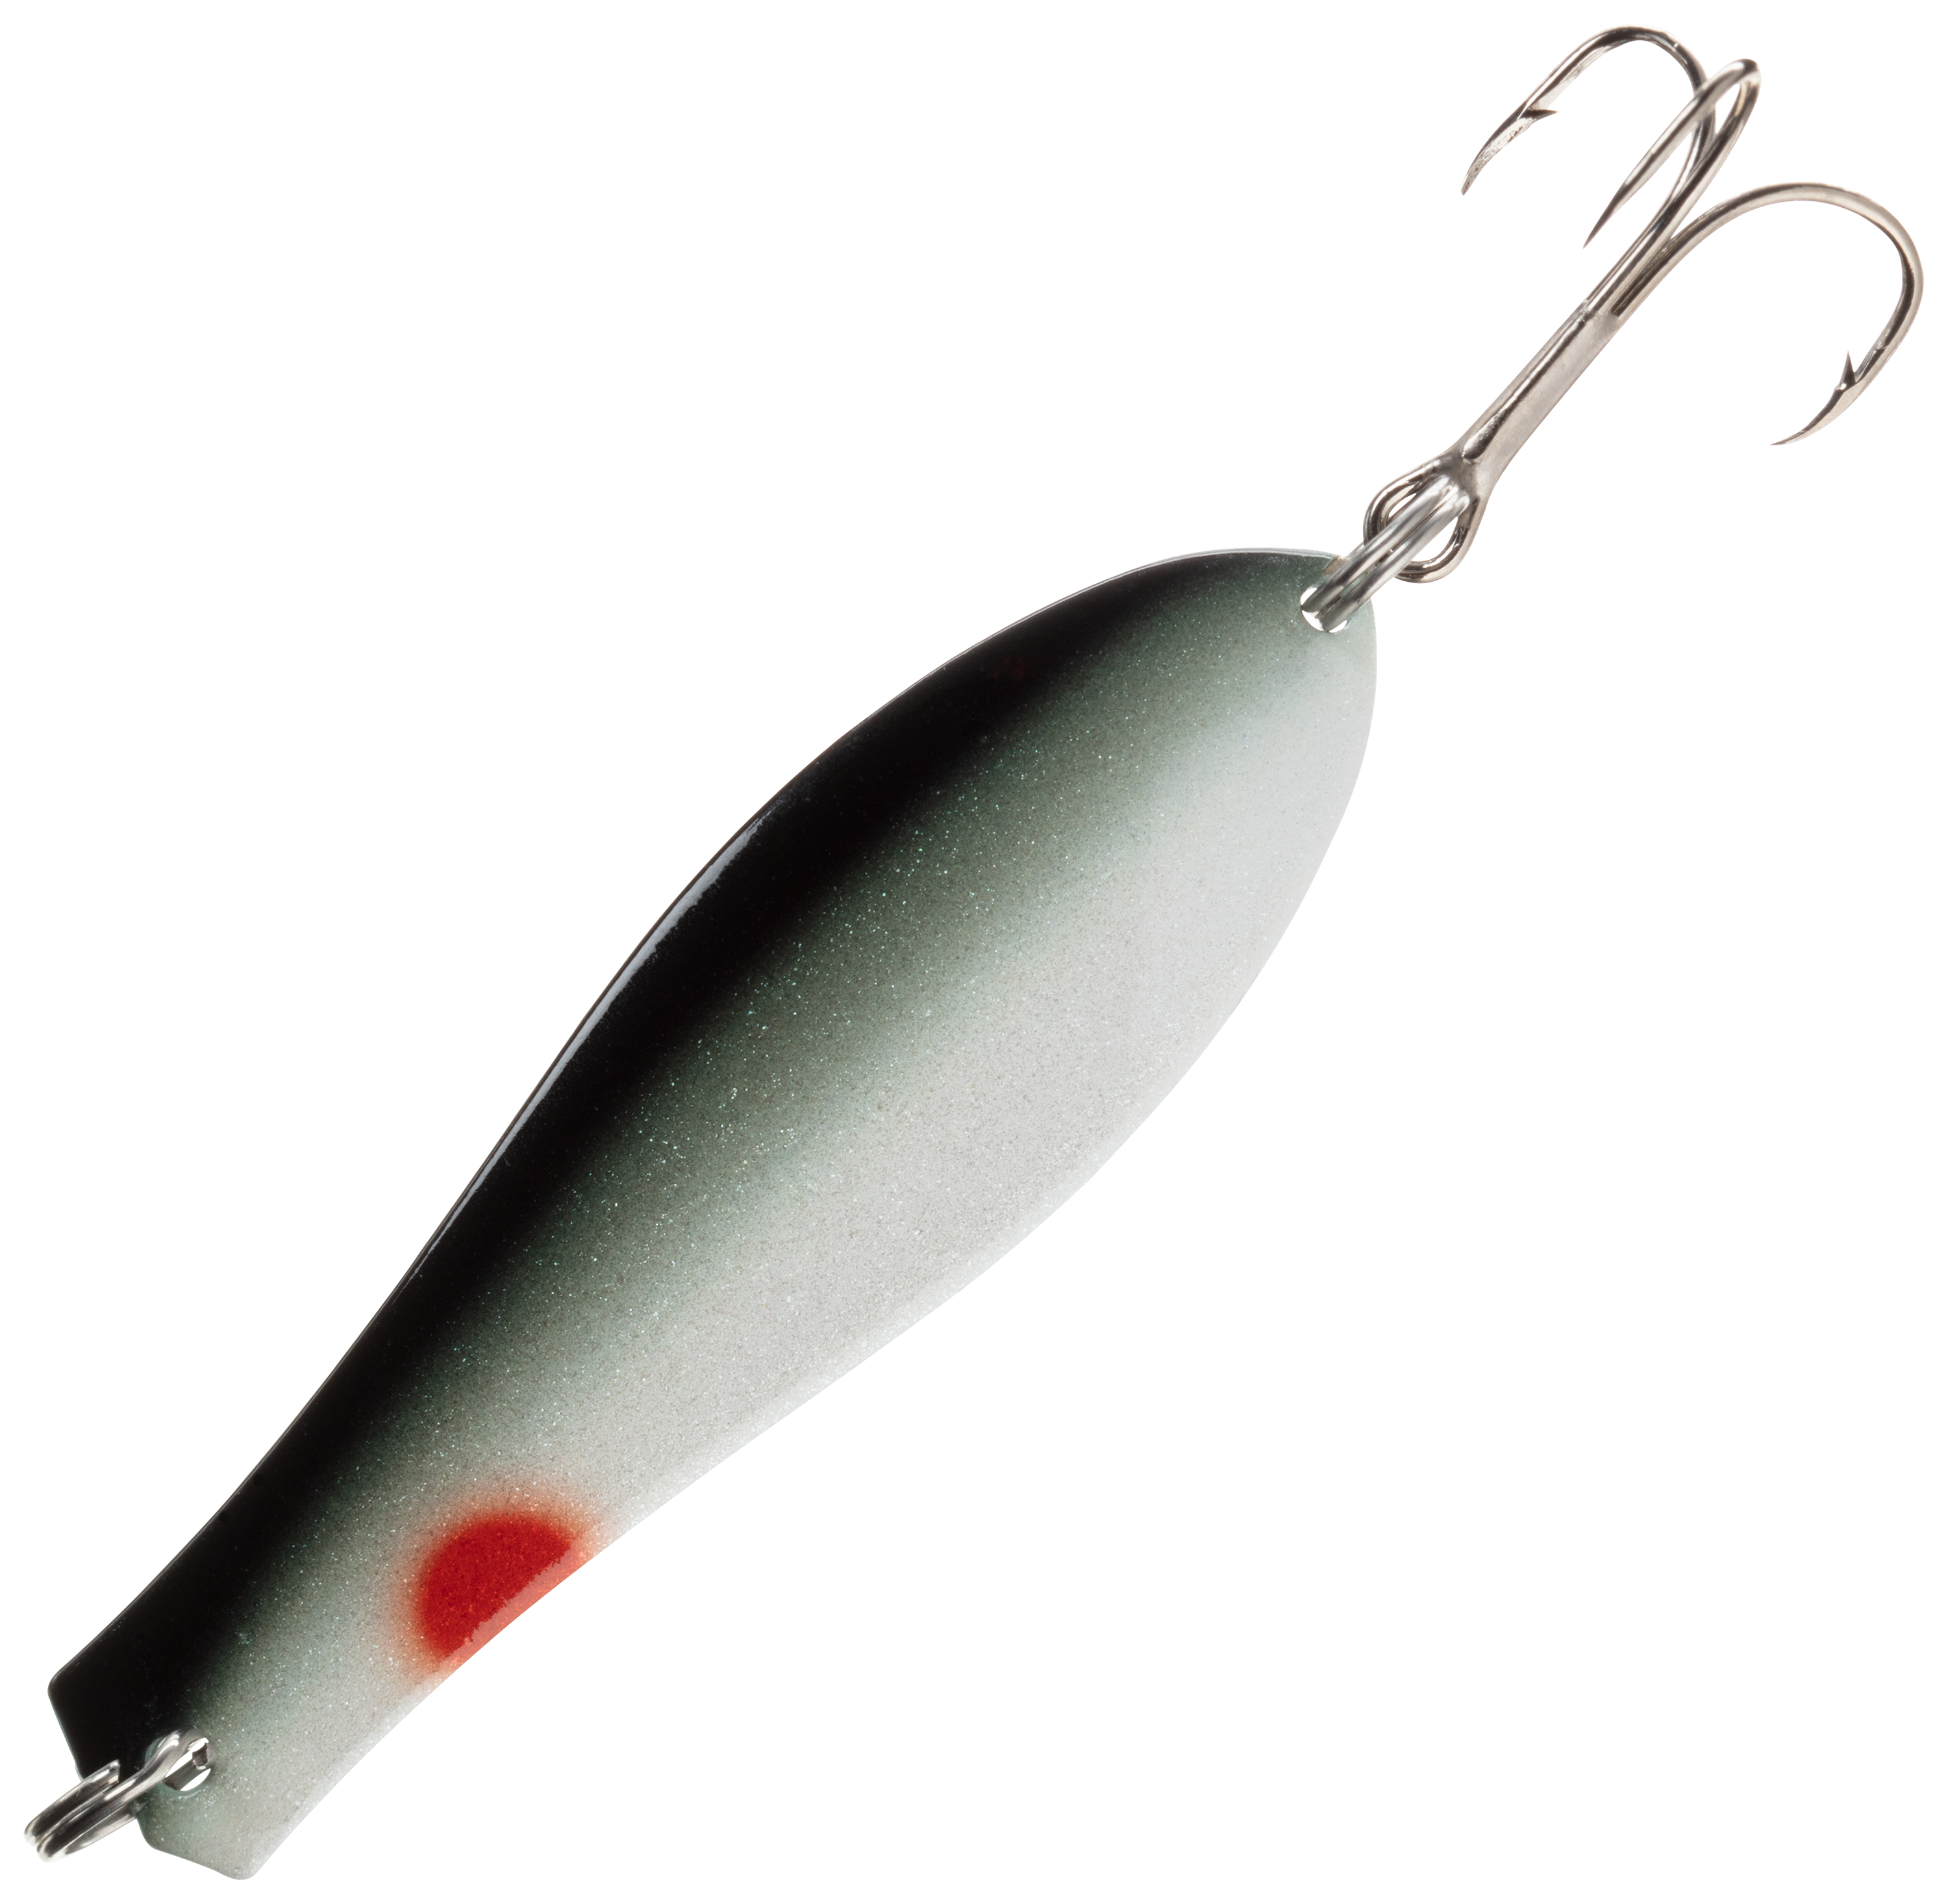 Doctor Spoon in (42) Perch - Yellow Bird Fishing Products